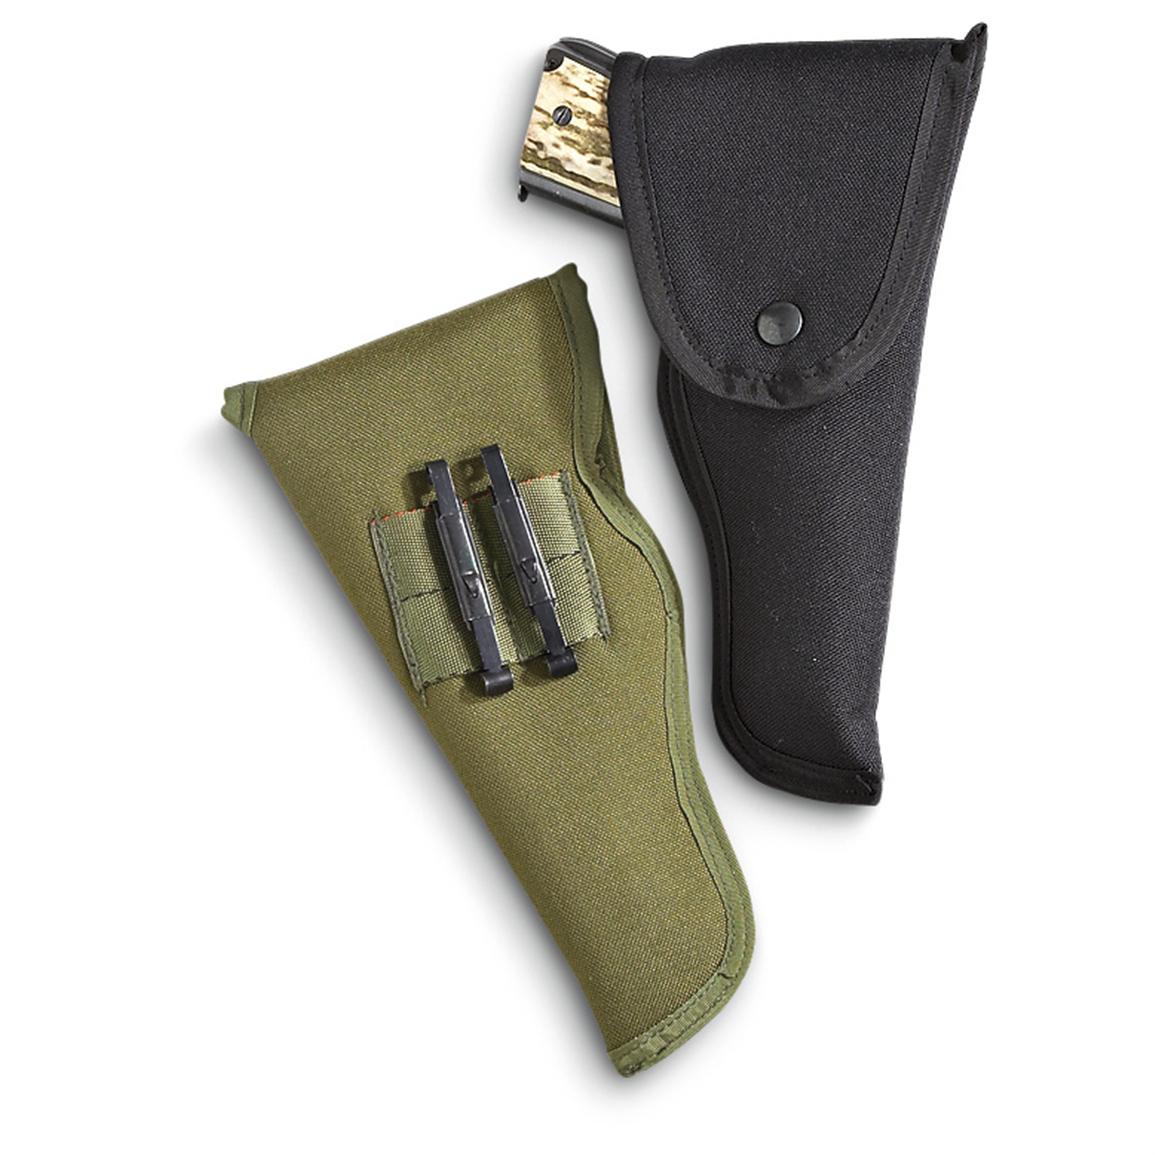 2 Nylon 1911 Hip Holsters 157740, Holsters at Sportsman's Guide